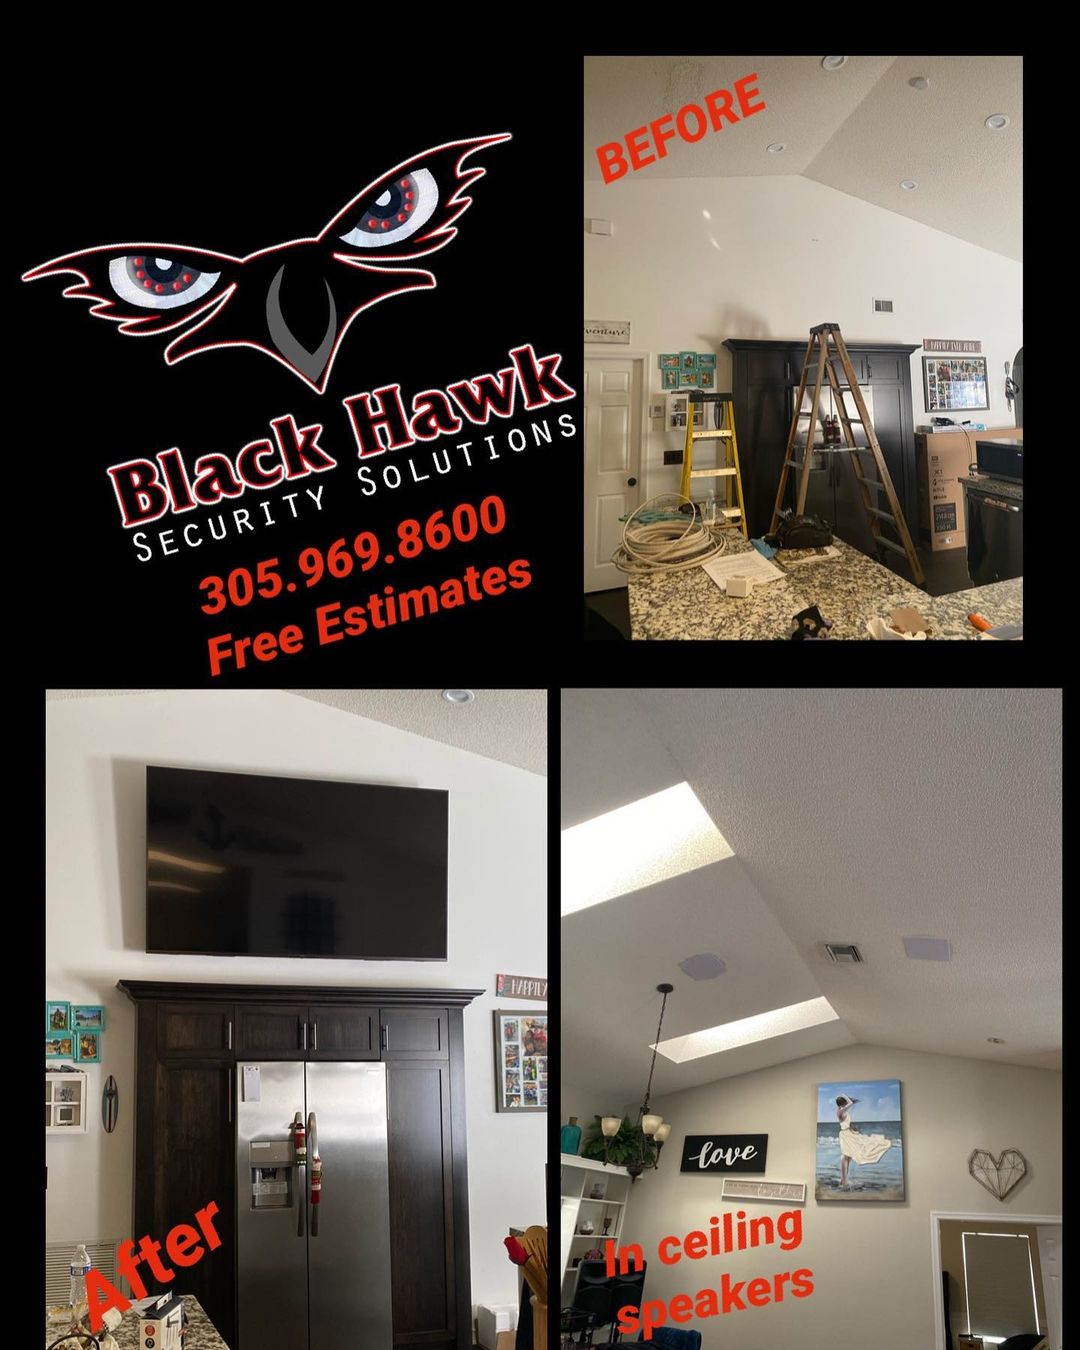 Free estimate 305.969.8600. 
Black Hawk Security Solutions . . 
List of our serv…